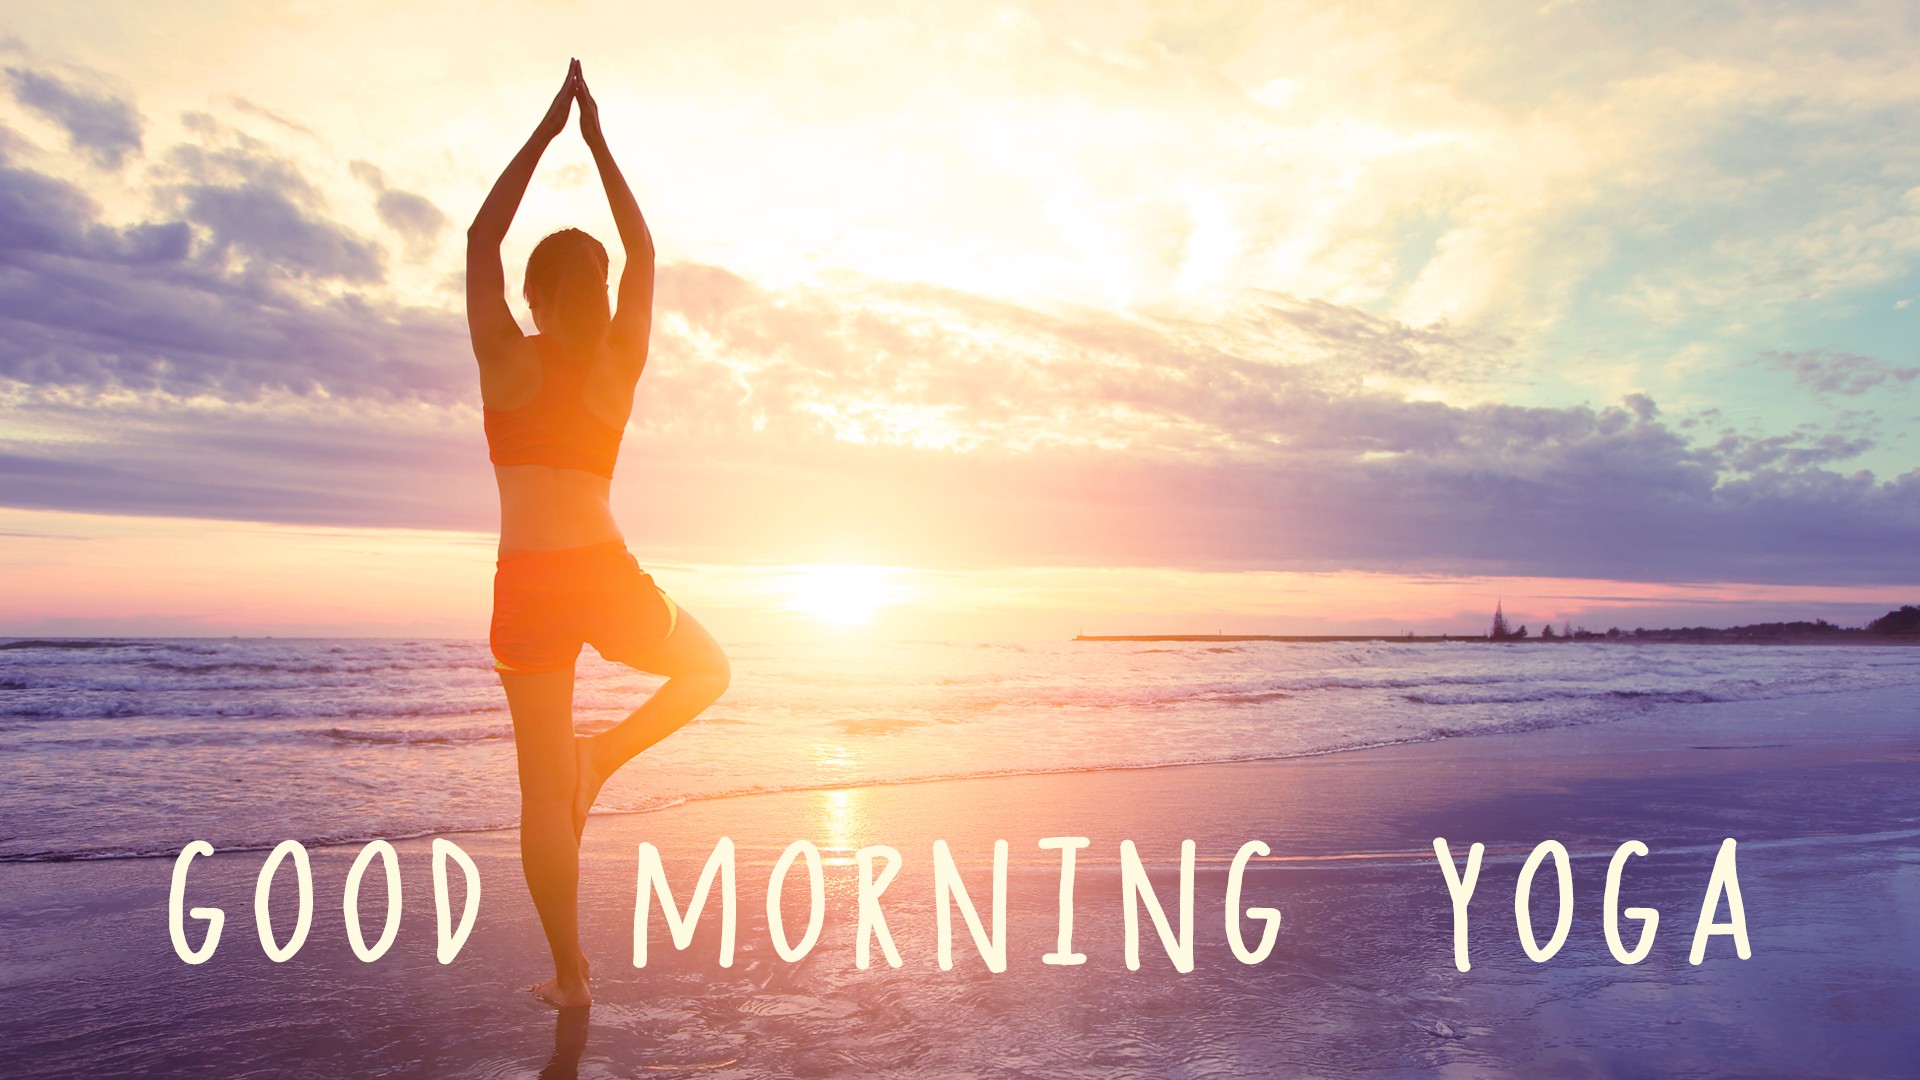 3 Mindful Ways To Start Your Morning